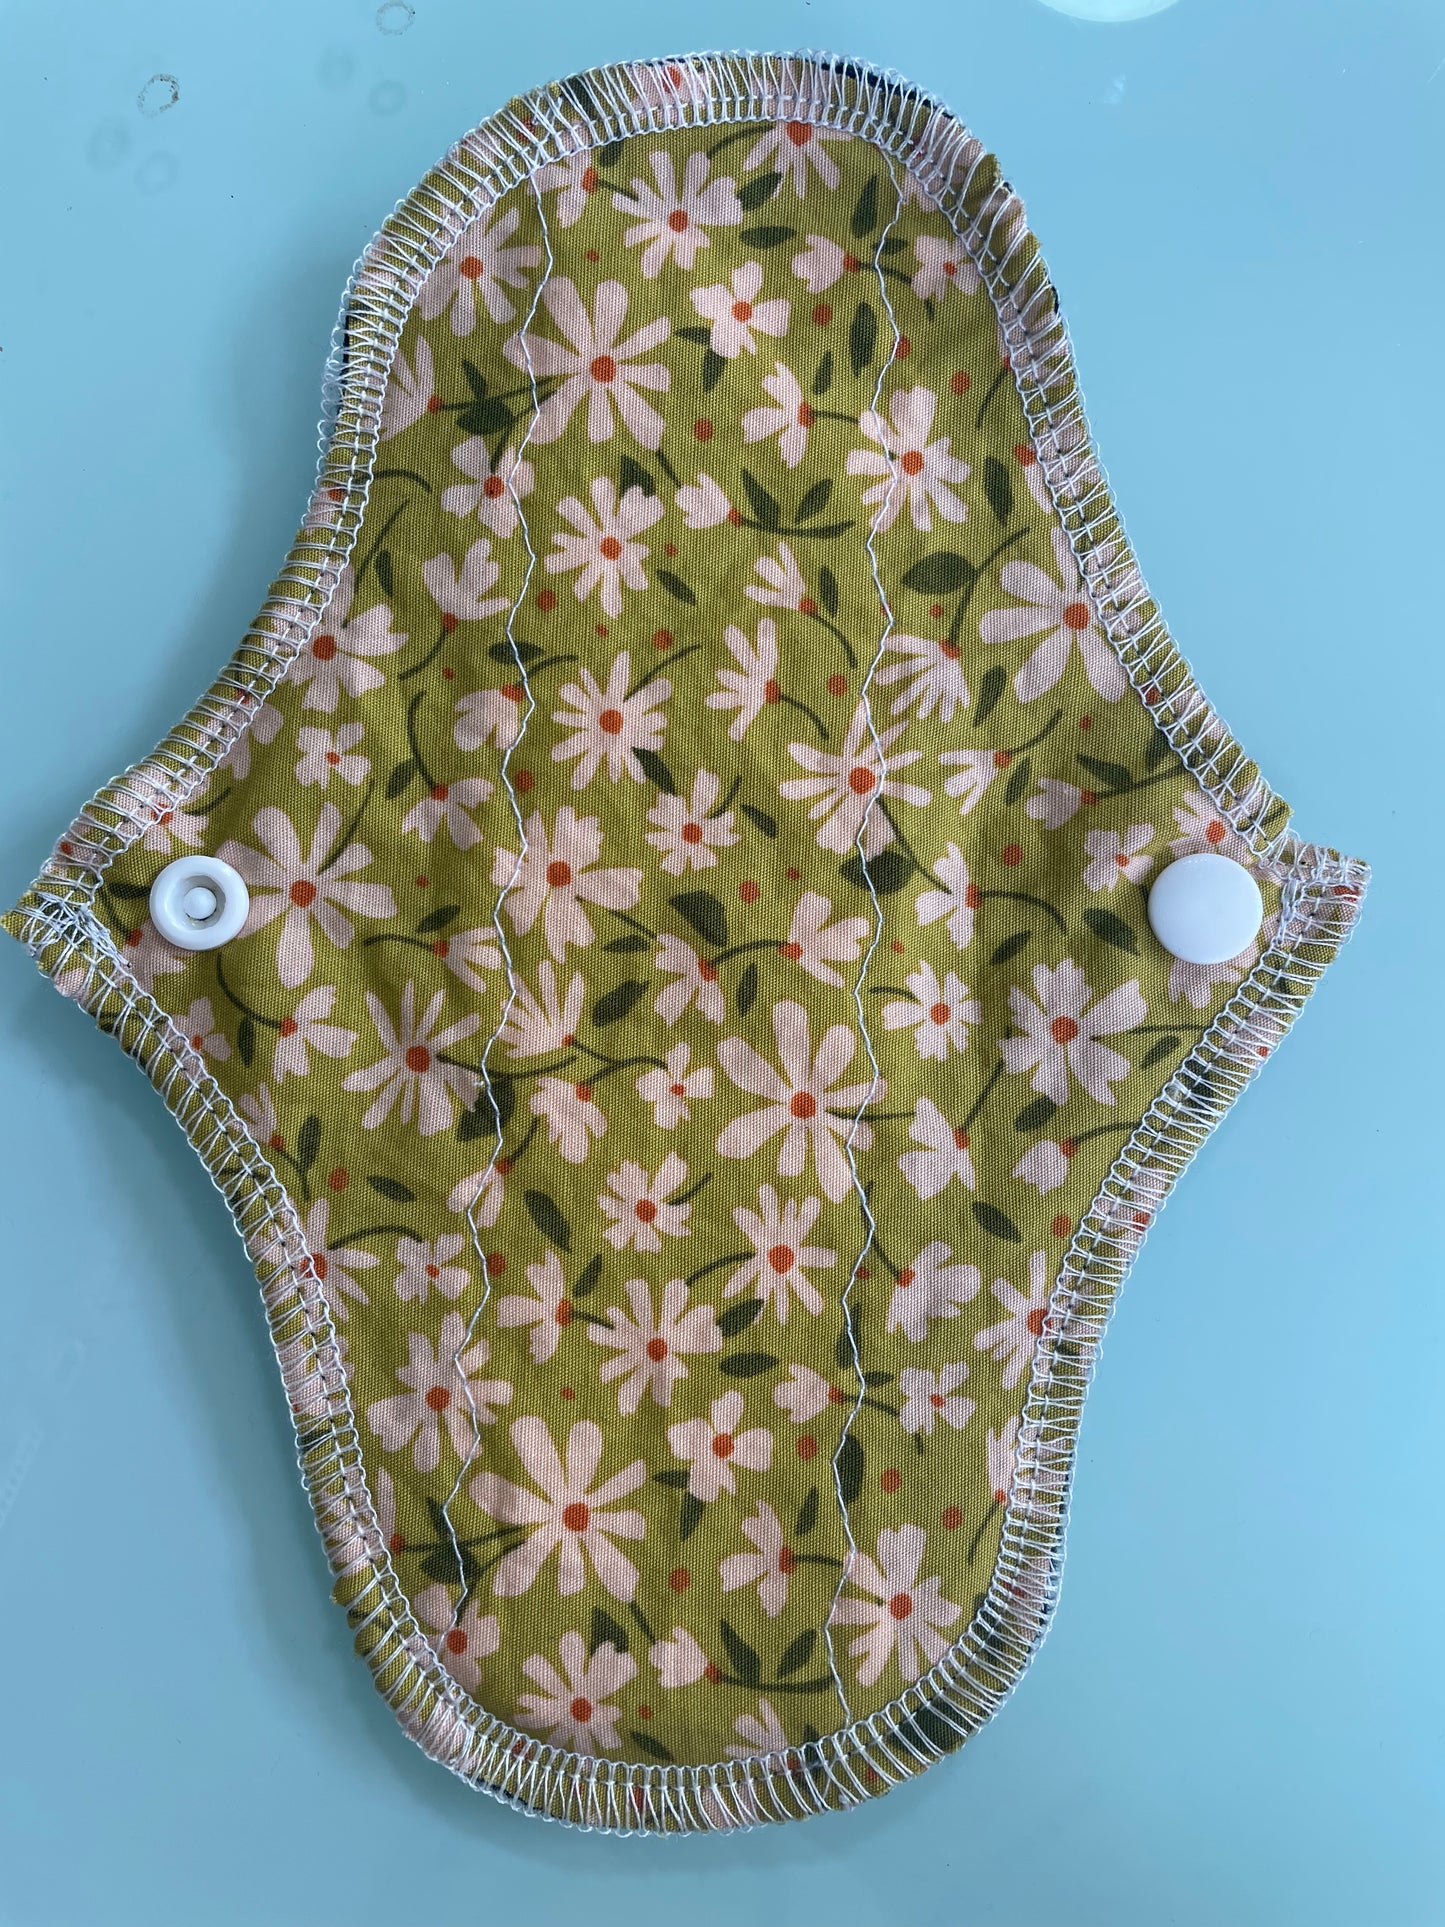 Fabric Panty liners